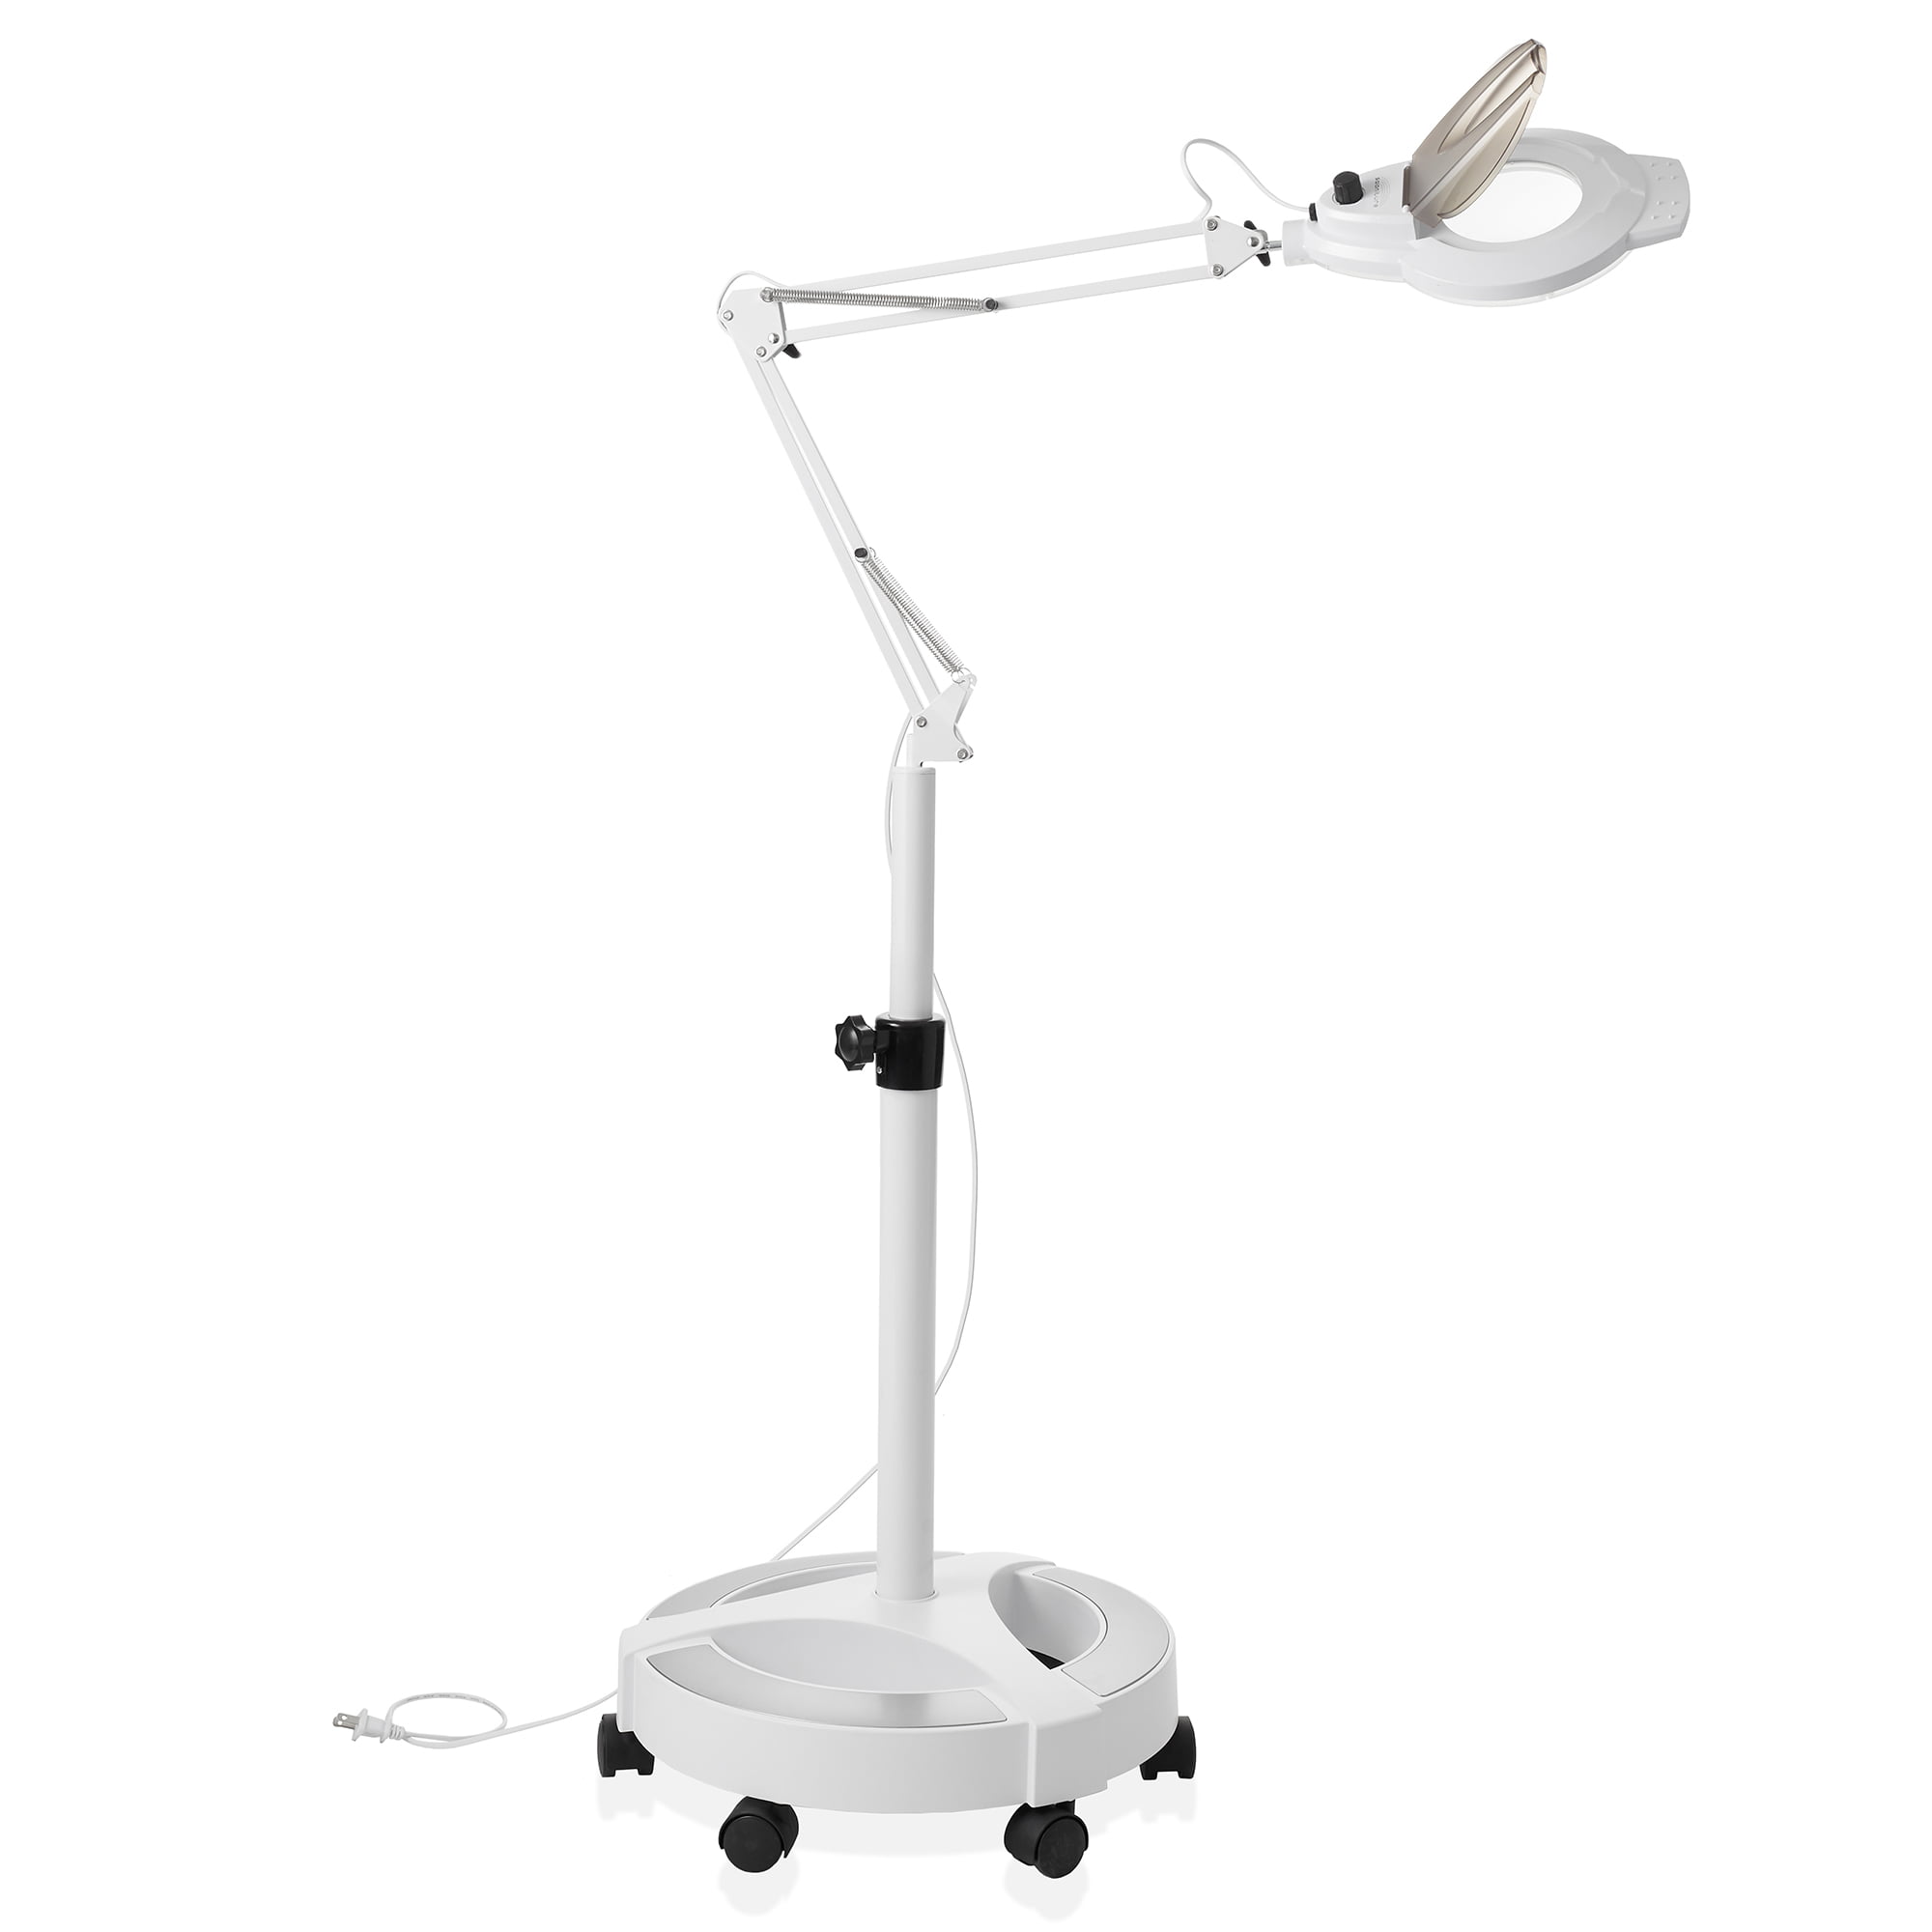 Floor standing LED Magnifying Lamp Adjustable Magnifying Lamp For